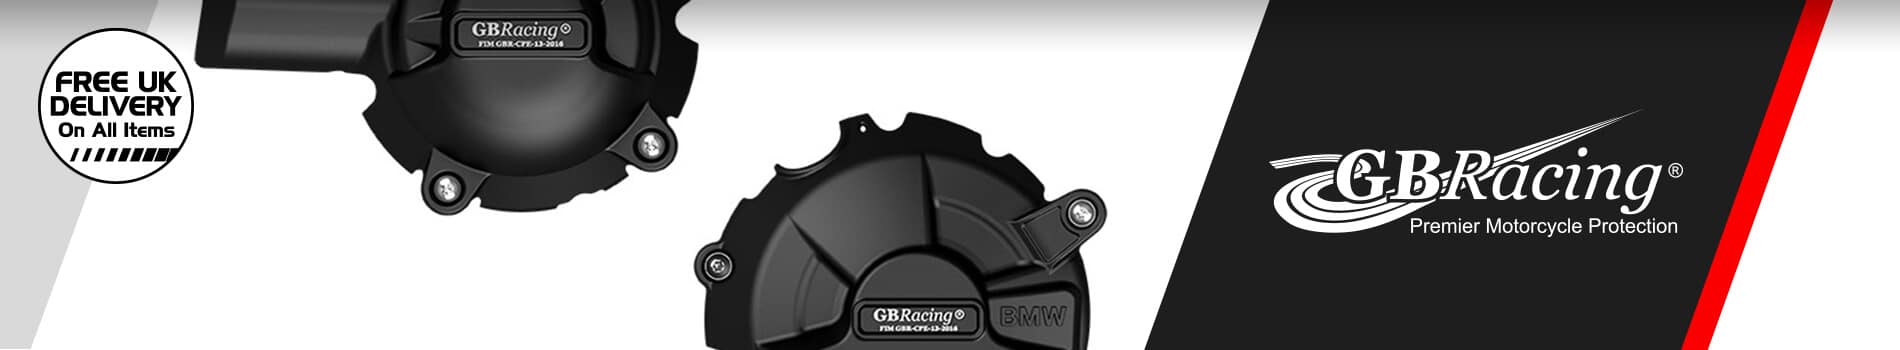 GB Racing - Free UK Delivery